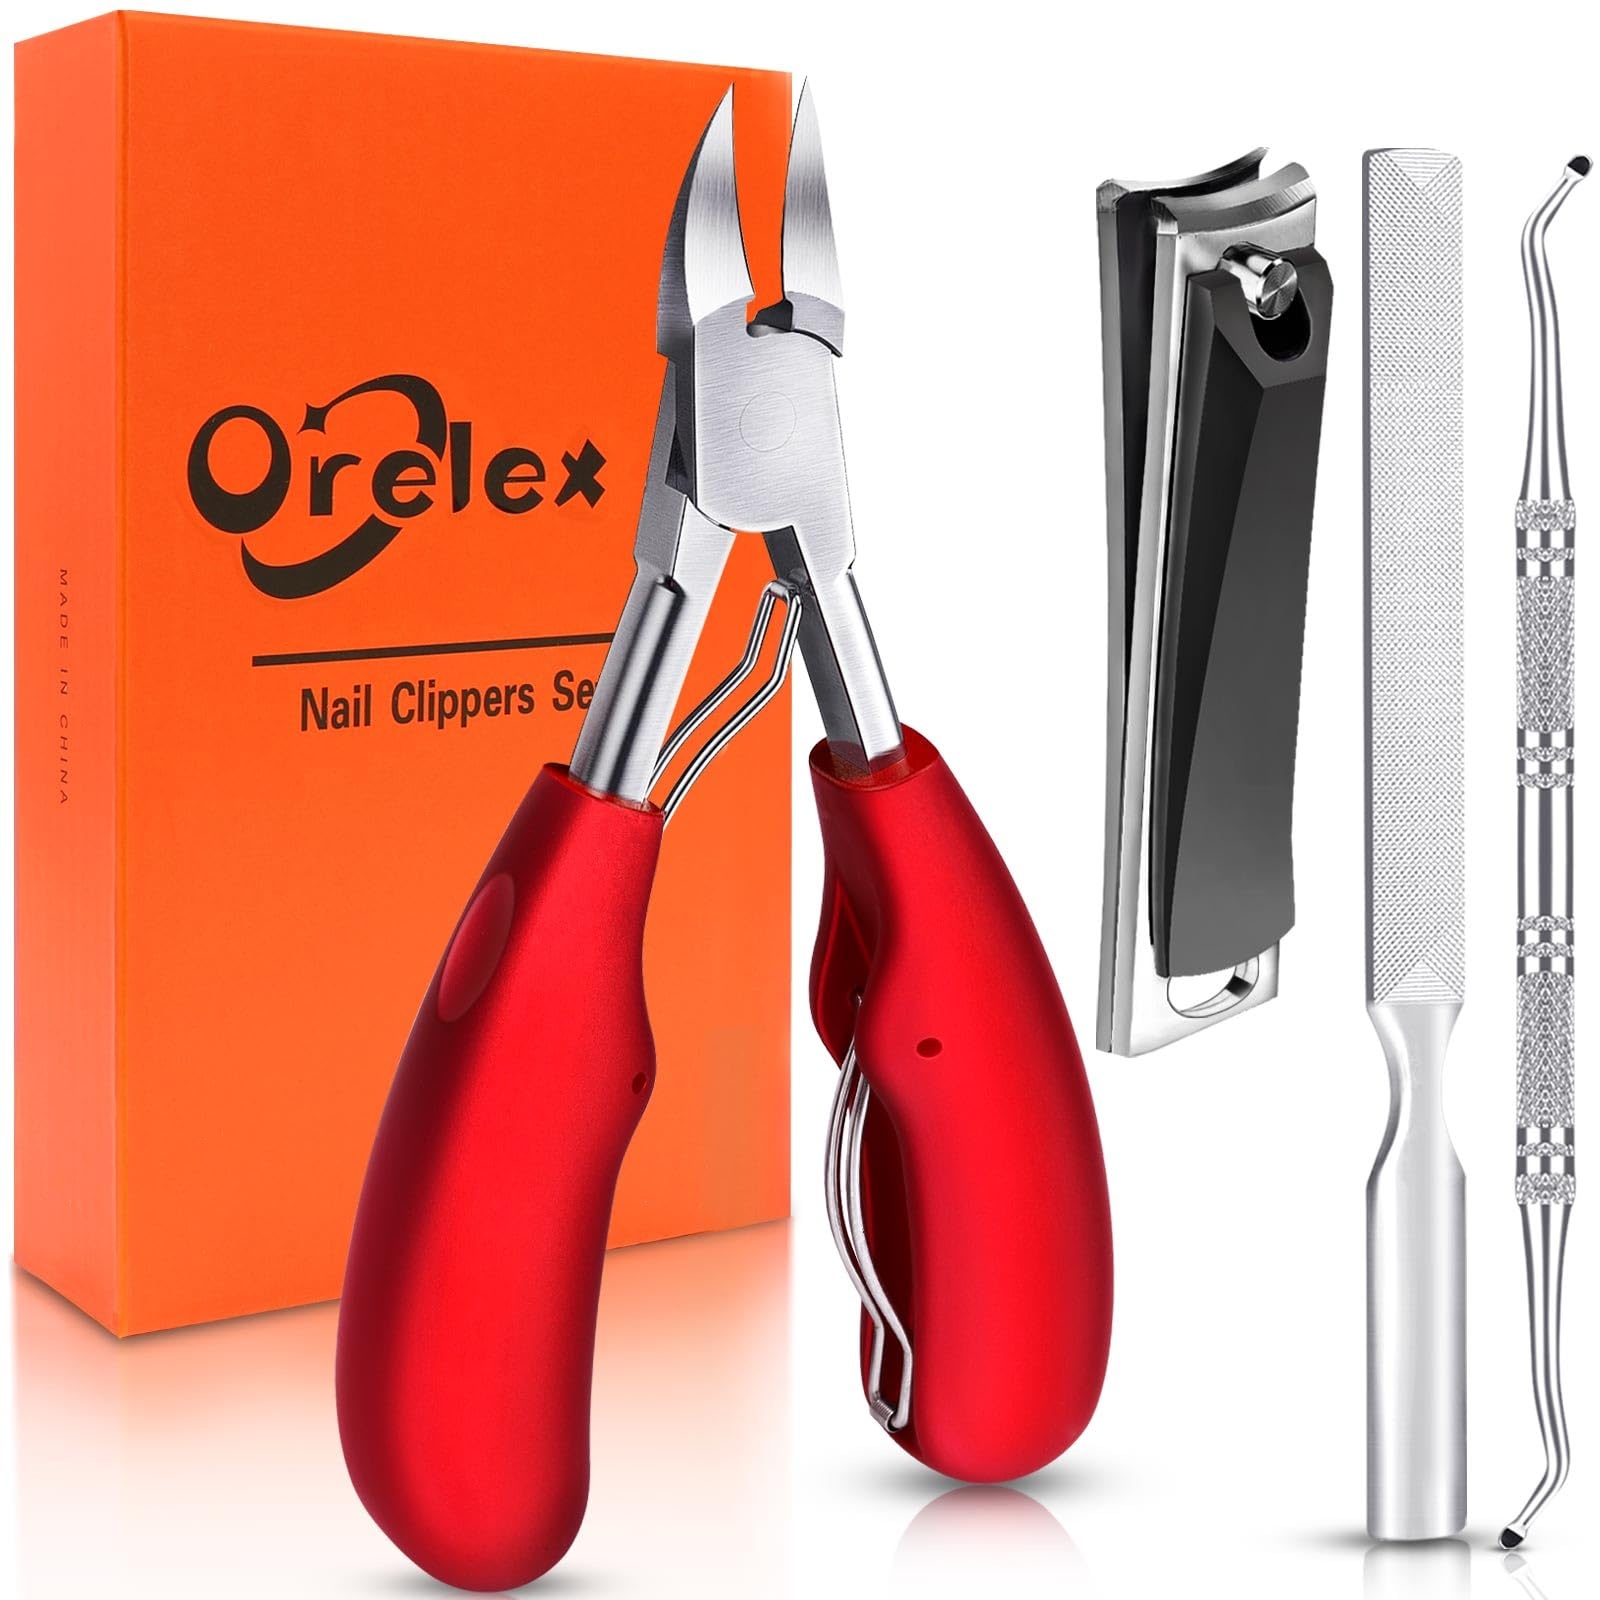 Orelex Professional Toenail Clippers Set, Sharp Nail Clippers for Ingrown Strong Toenails, Stainless Steel Pedicure Nail Clippers, Sharp Large Blade, Soft Handle, Set of 4 Toenails Nail Scissors